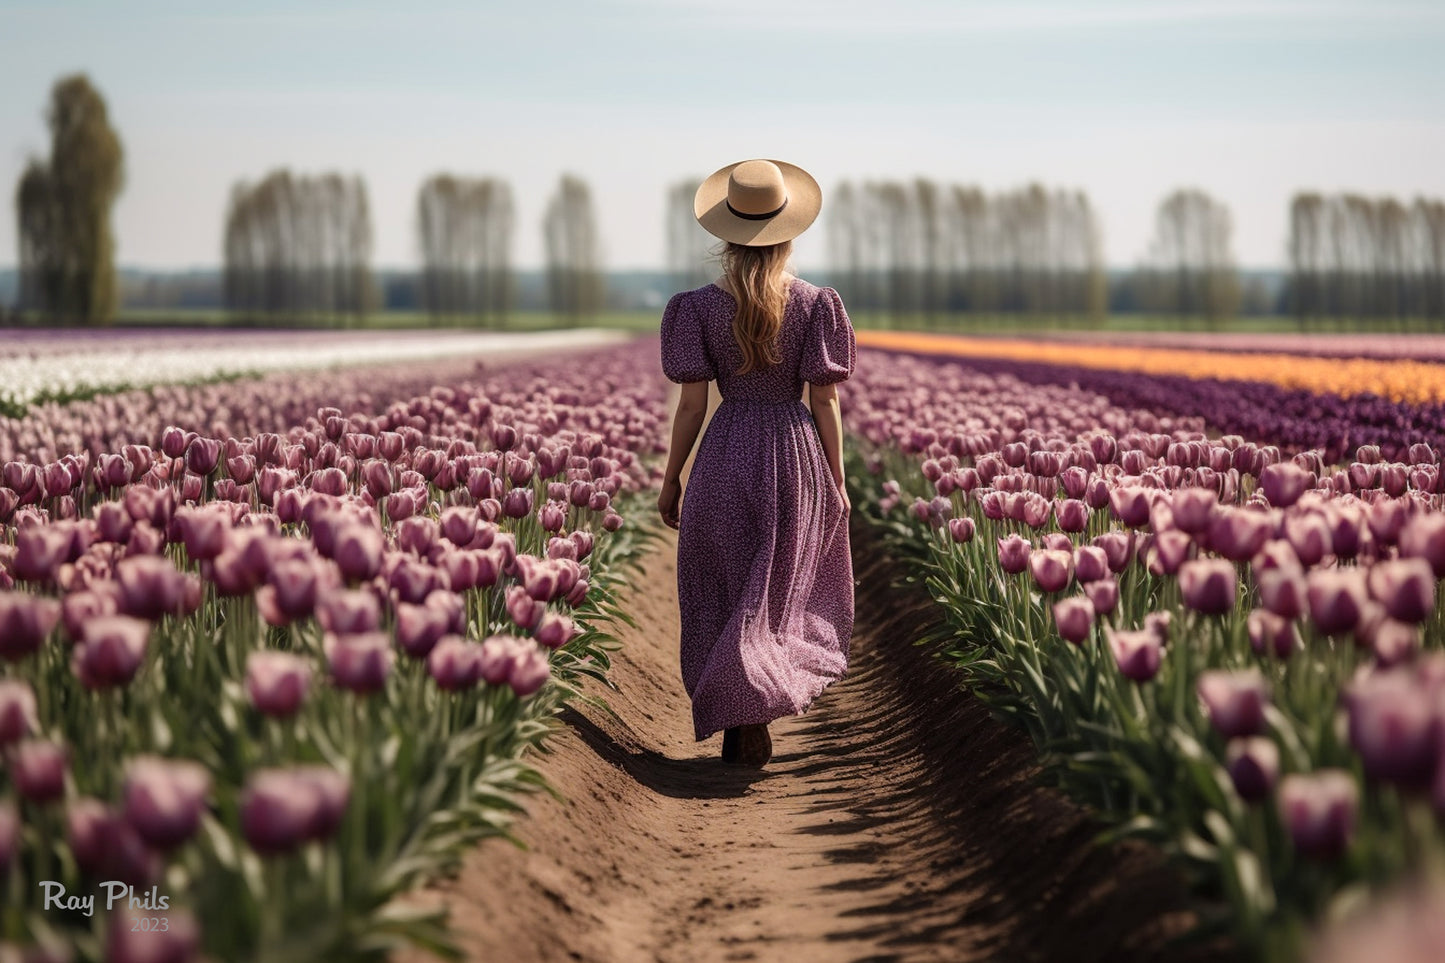 Tulips, and a model XI